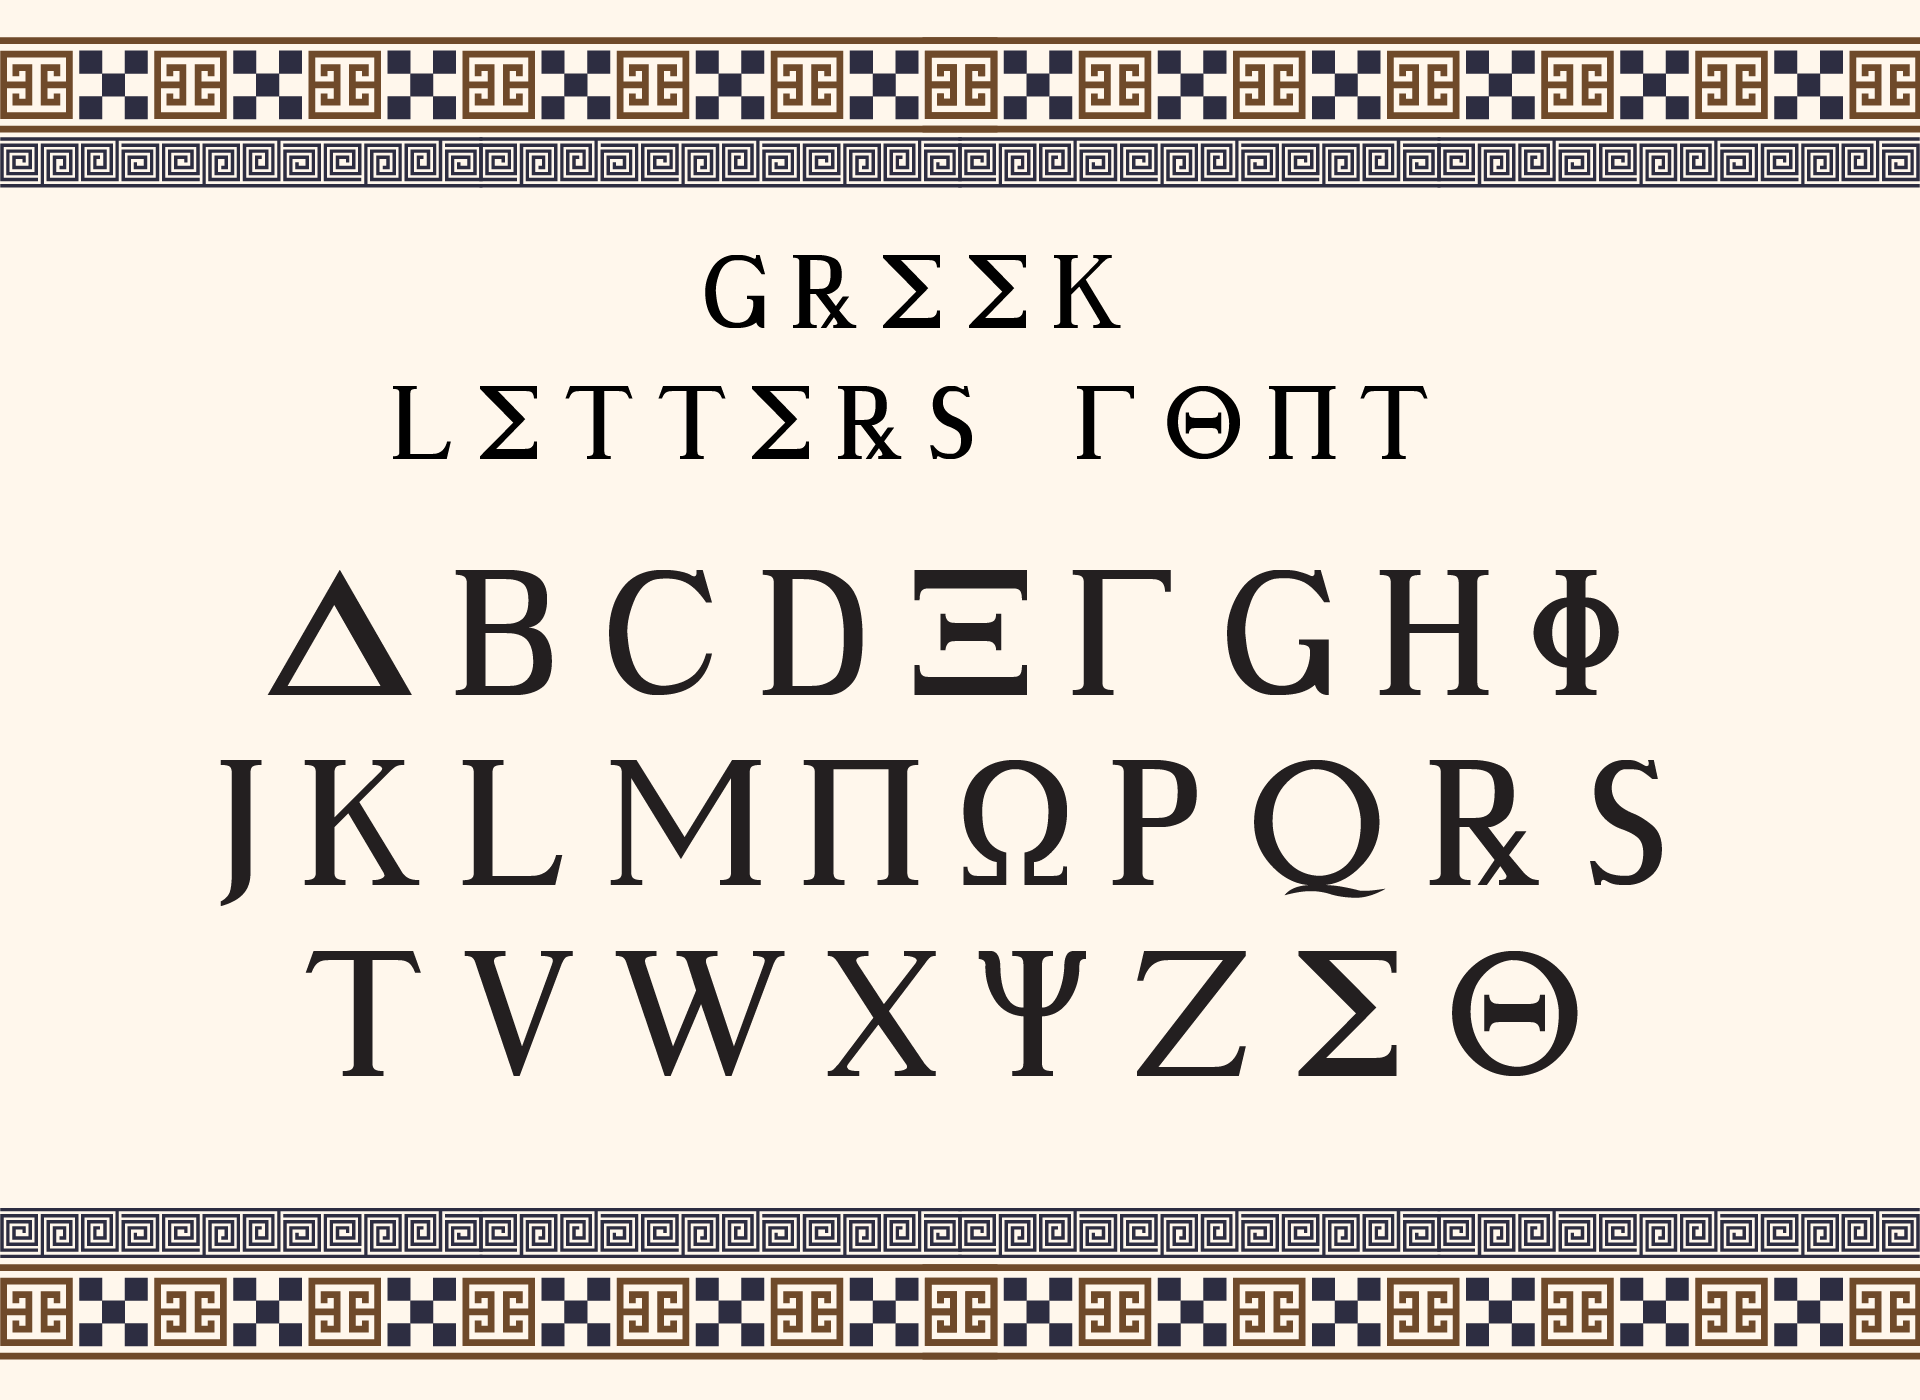 Greek Letters Font Styles Printable